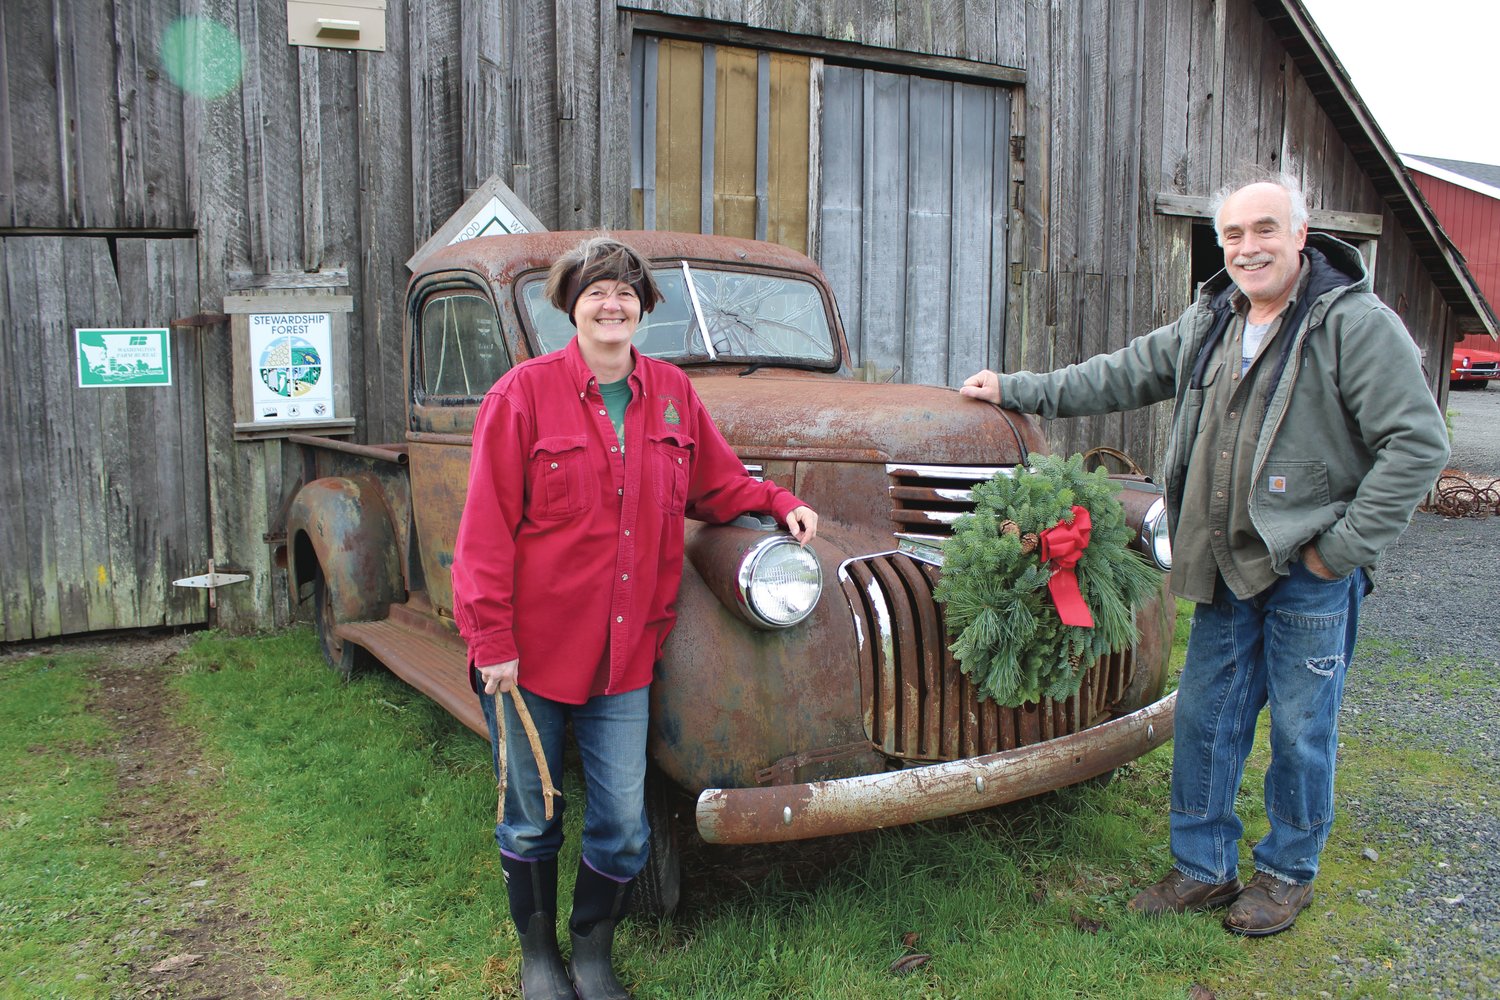 Karen and Eric Bernard, owners of Mistletoe Tree Farm near Winlock, stand near the old barn and pickup truck that greets visitors to the Christmas tree farm. The stewardship designation sign hanging on the barn is one of their prized possessions as the couple emphasizes caring for their land as part of their Christmas tree business.